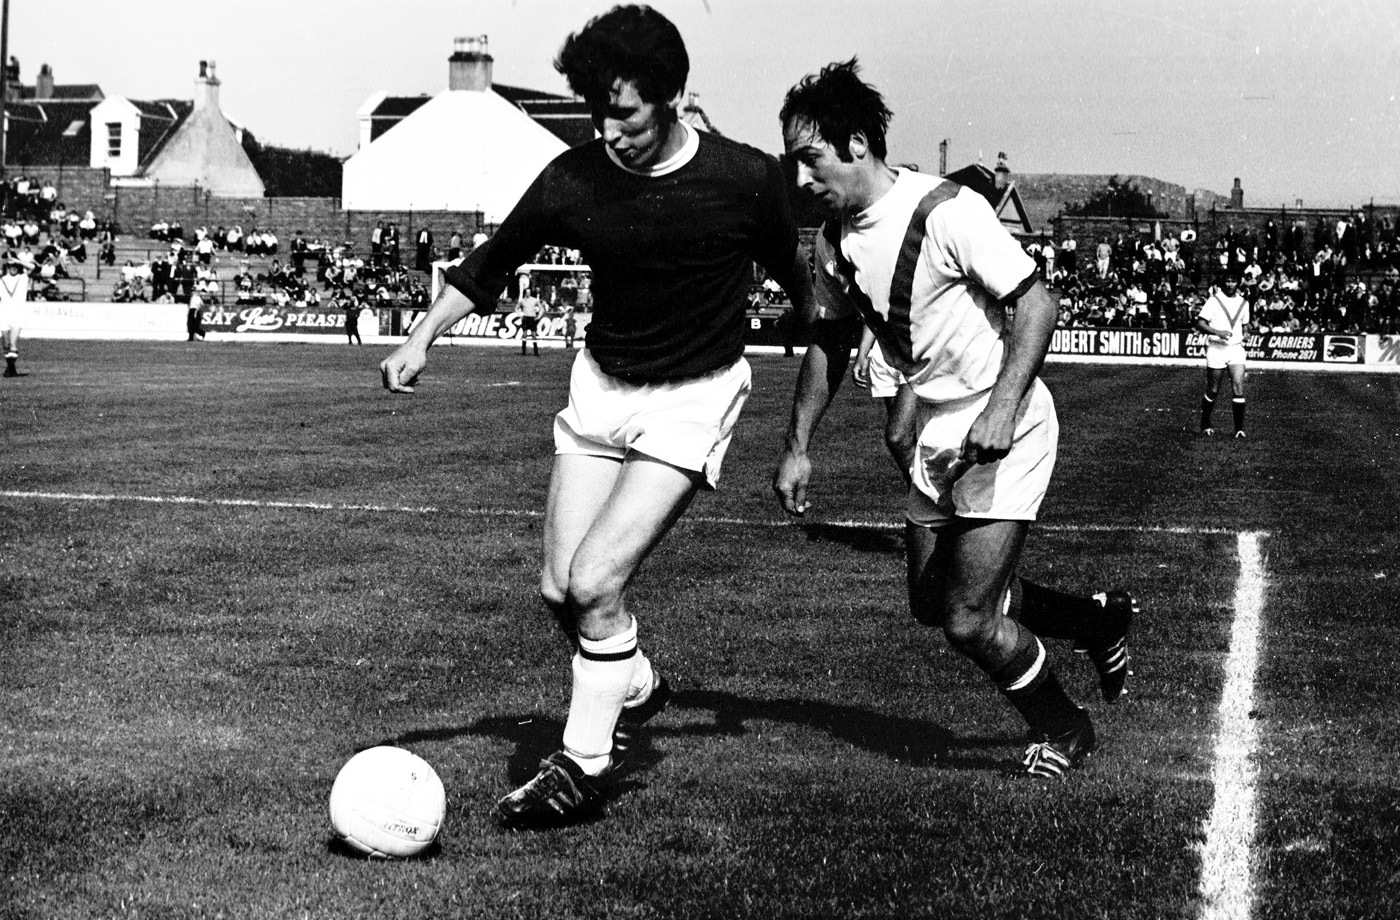 John Lambie in action for St Johnstone against Drew Jarvie of Airdrie at Broomfield Park in 1970.